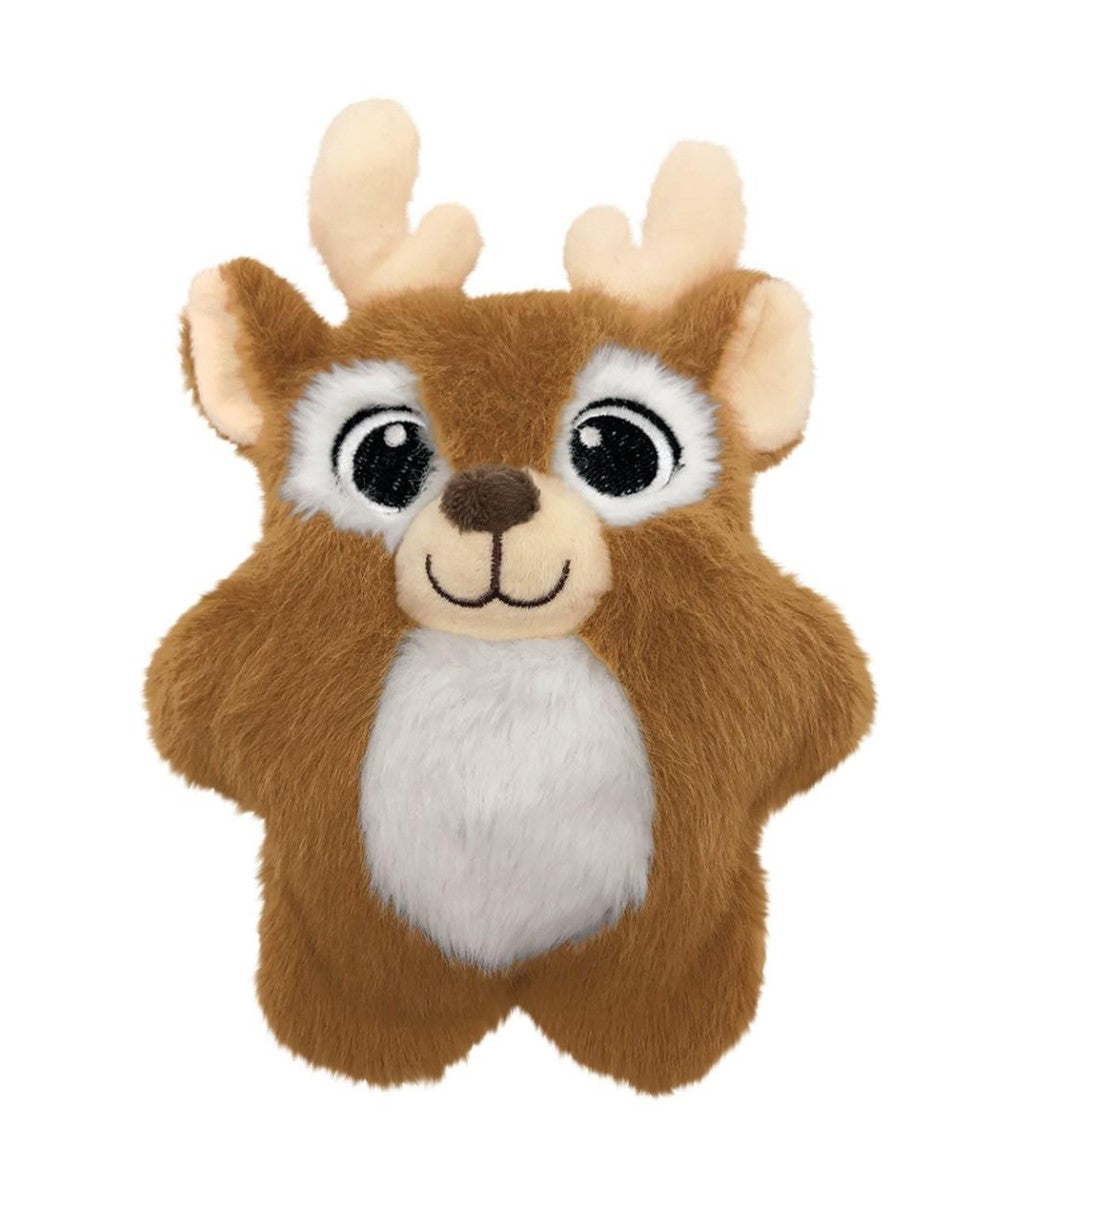 Kong Holiday Snuzzles Dog Toy - Reindeer